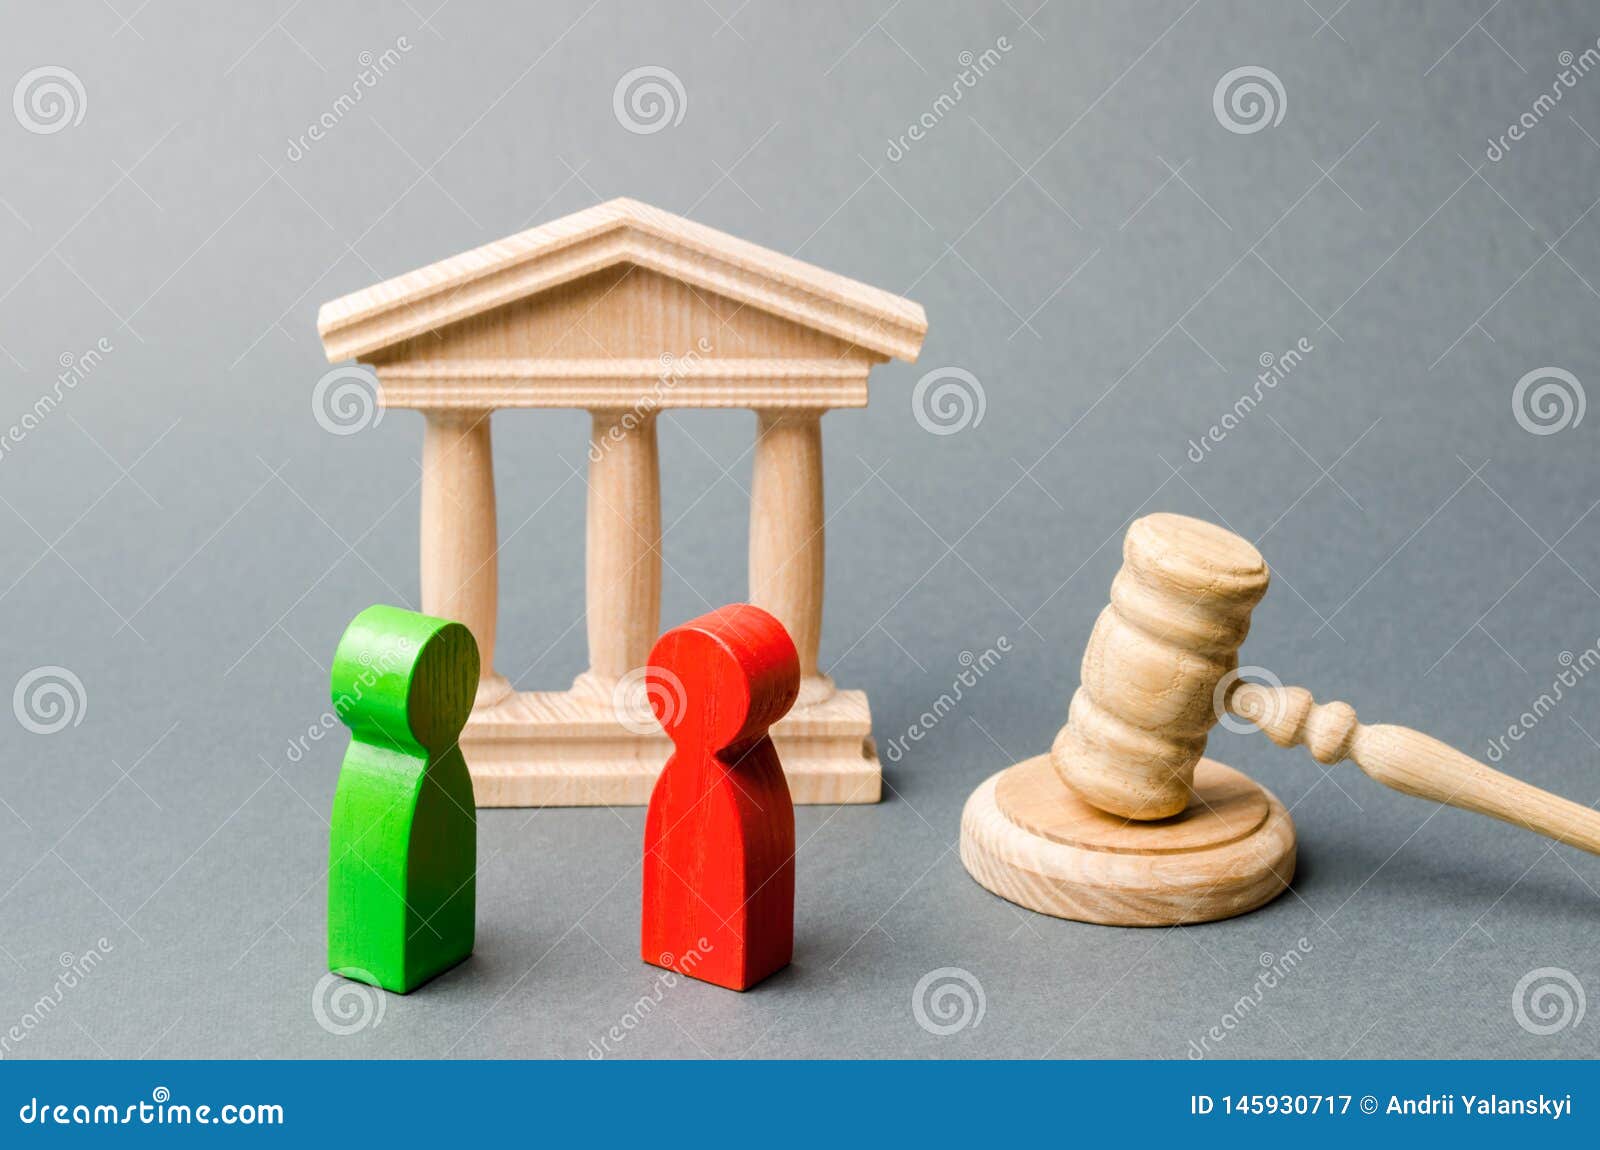 wooden figures of people standing near the judge`s gavel. litigation. business rivals. conflict of interest. law and justice. the